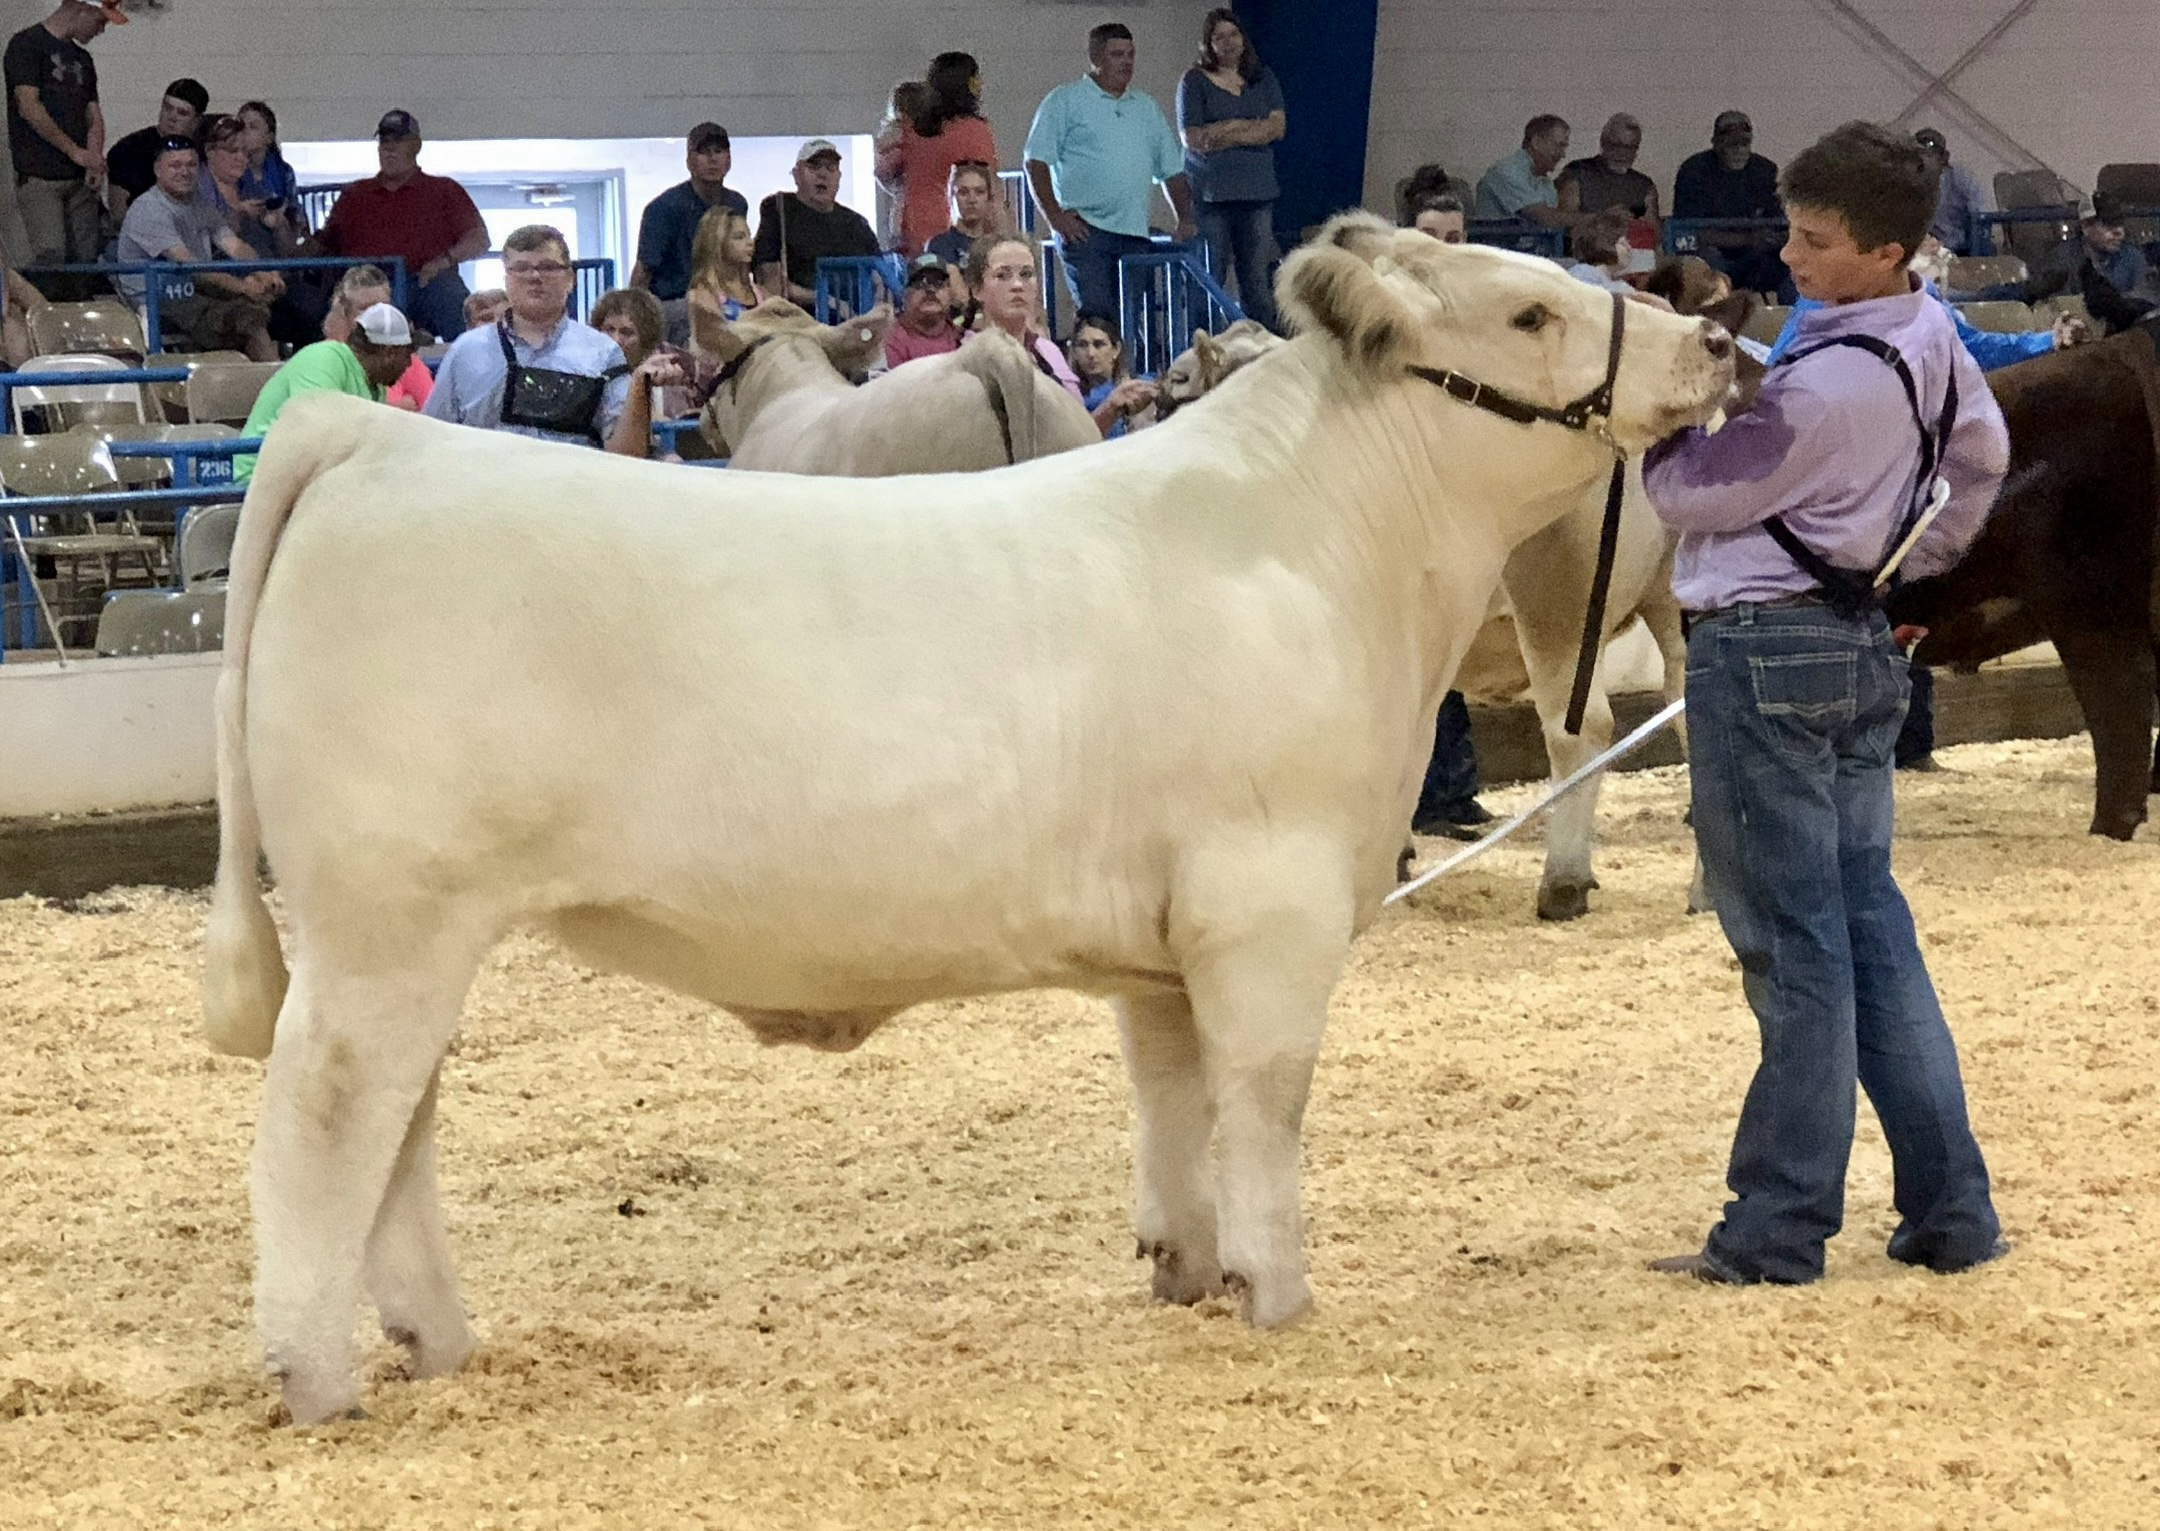 A Youth shows a cow in an arena.